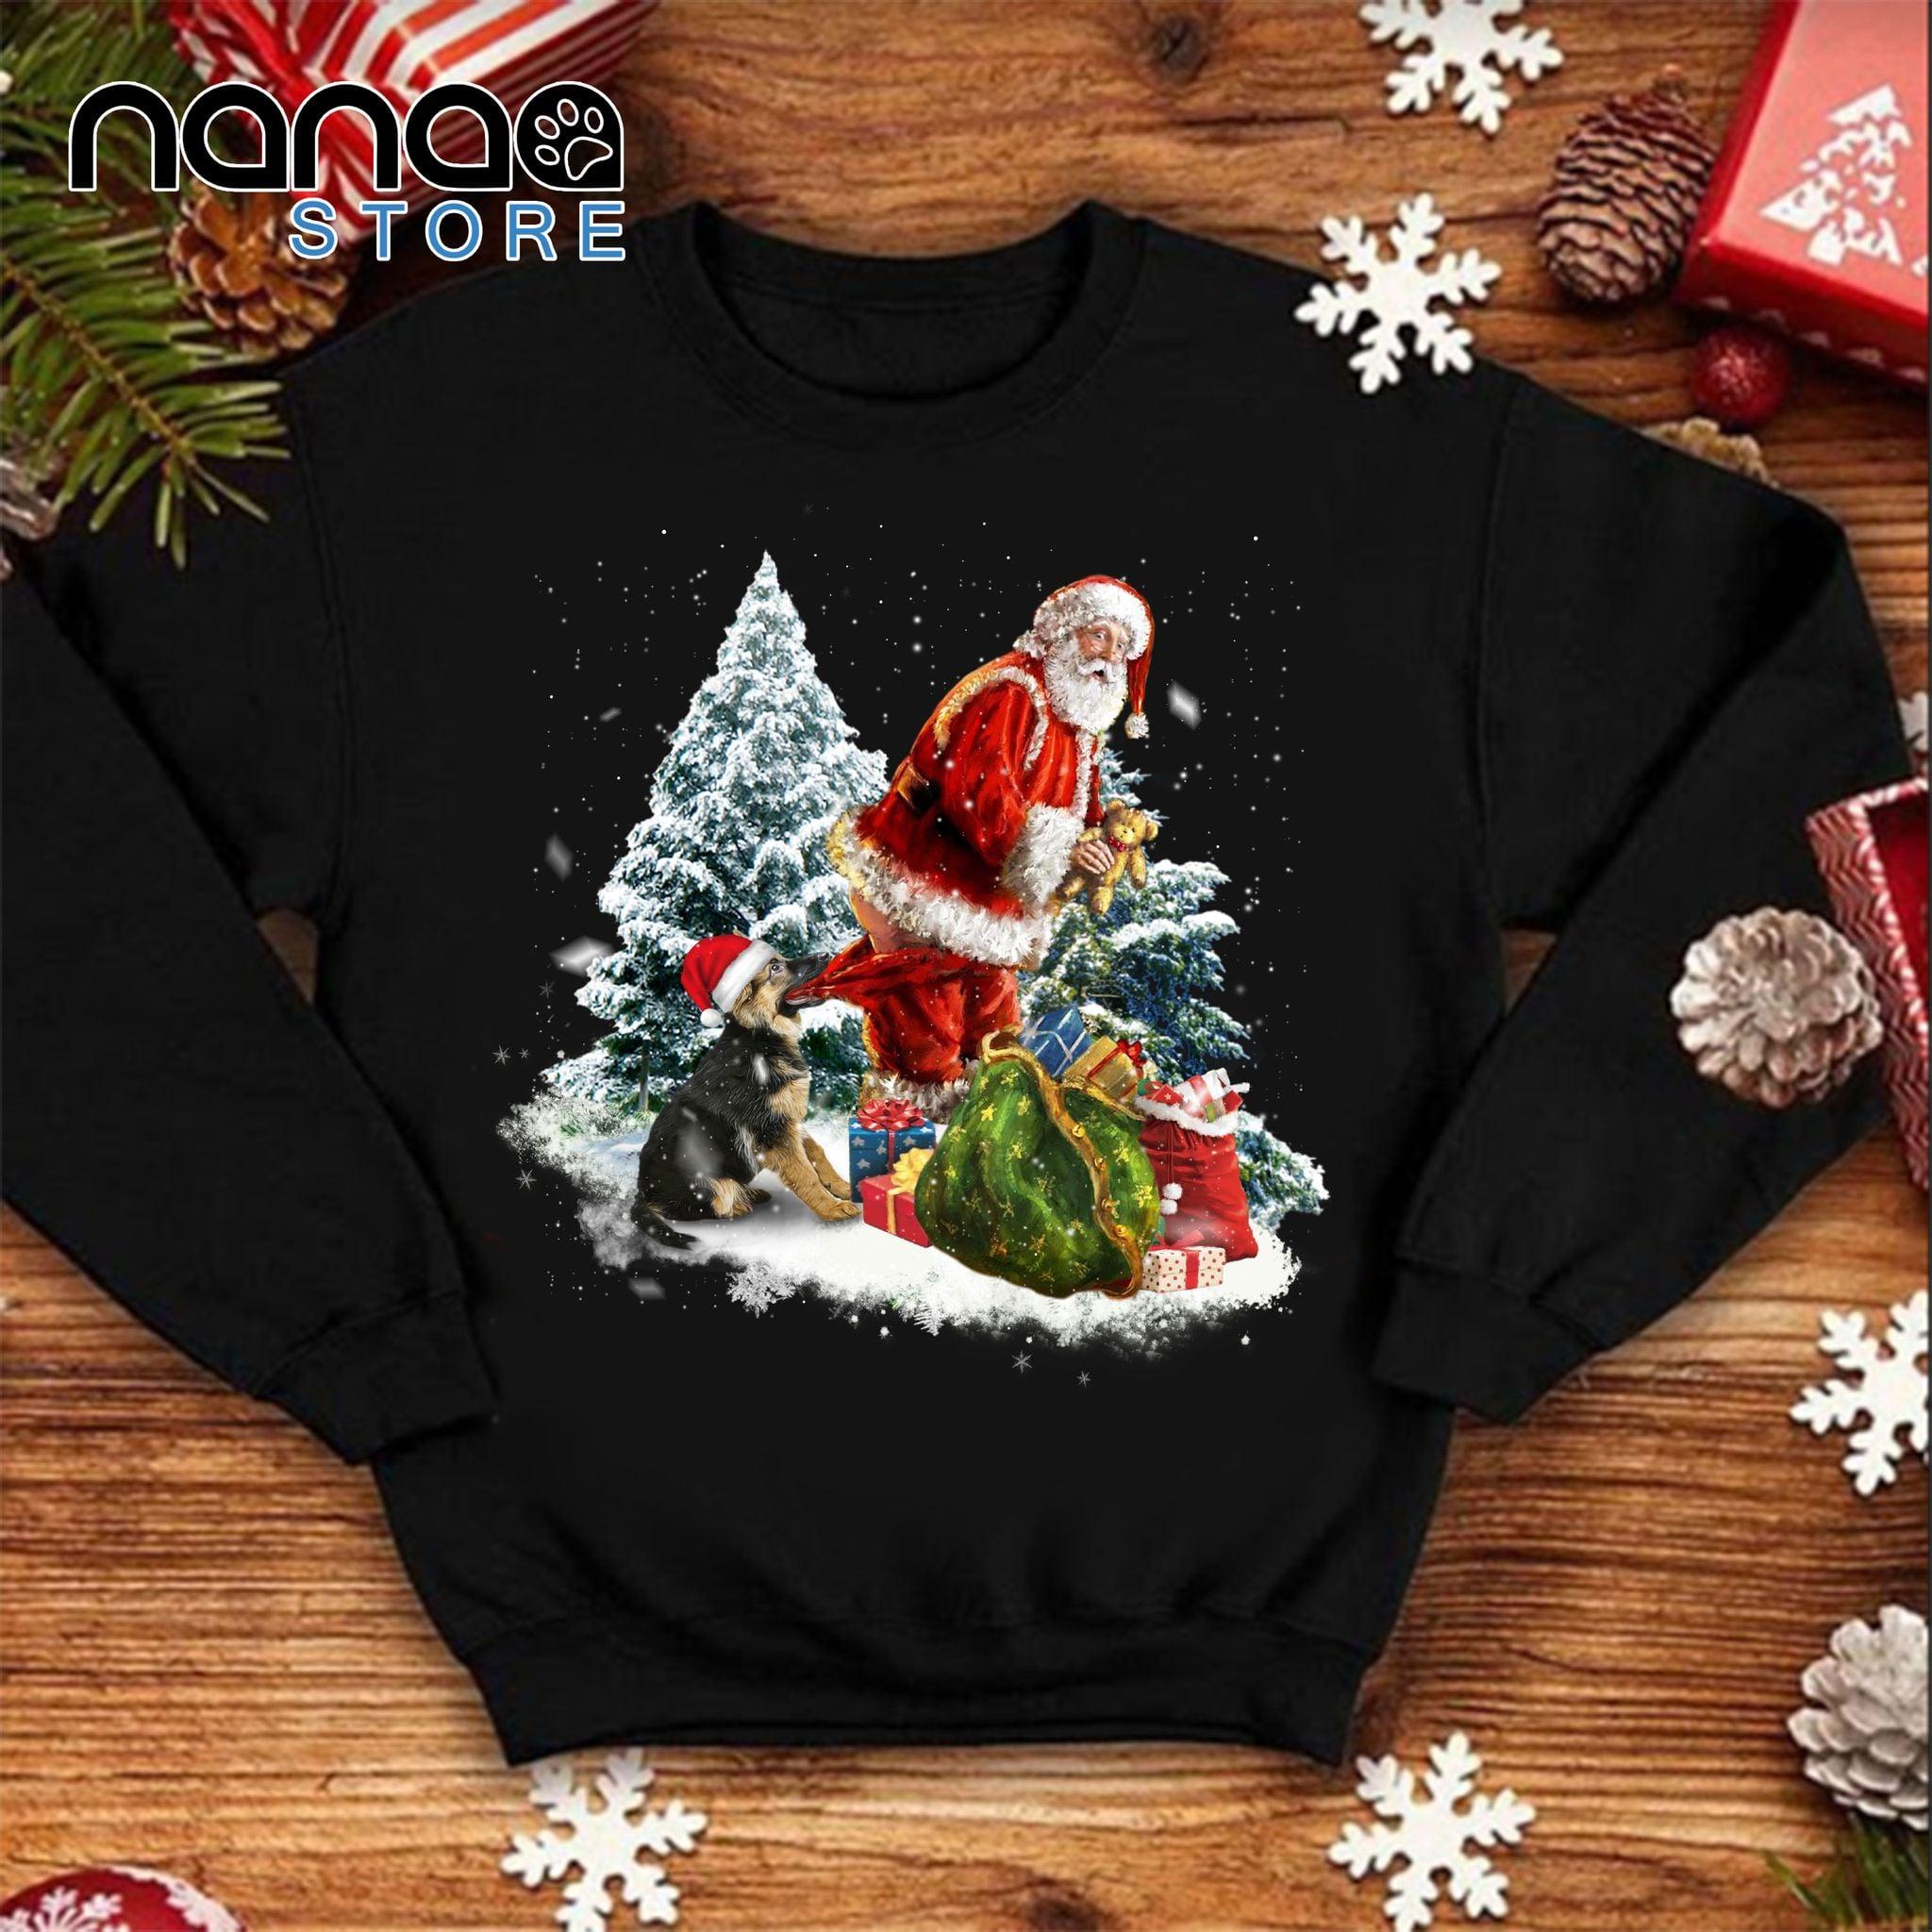 Santa Claus and puppy - Christmas day ugly sweater, Merry Christmas T-shirt